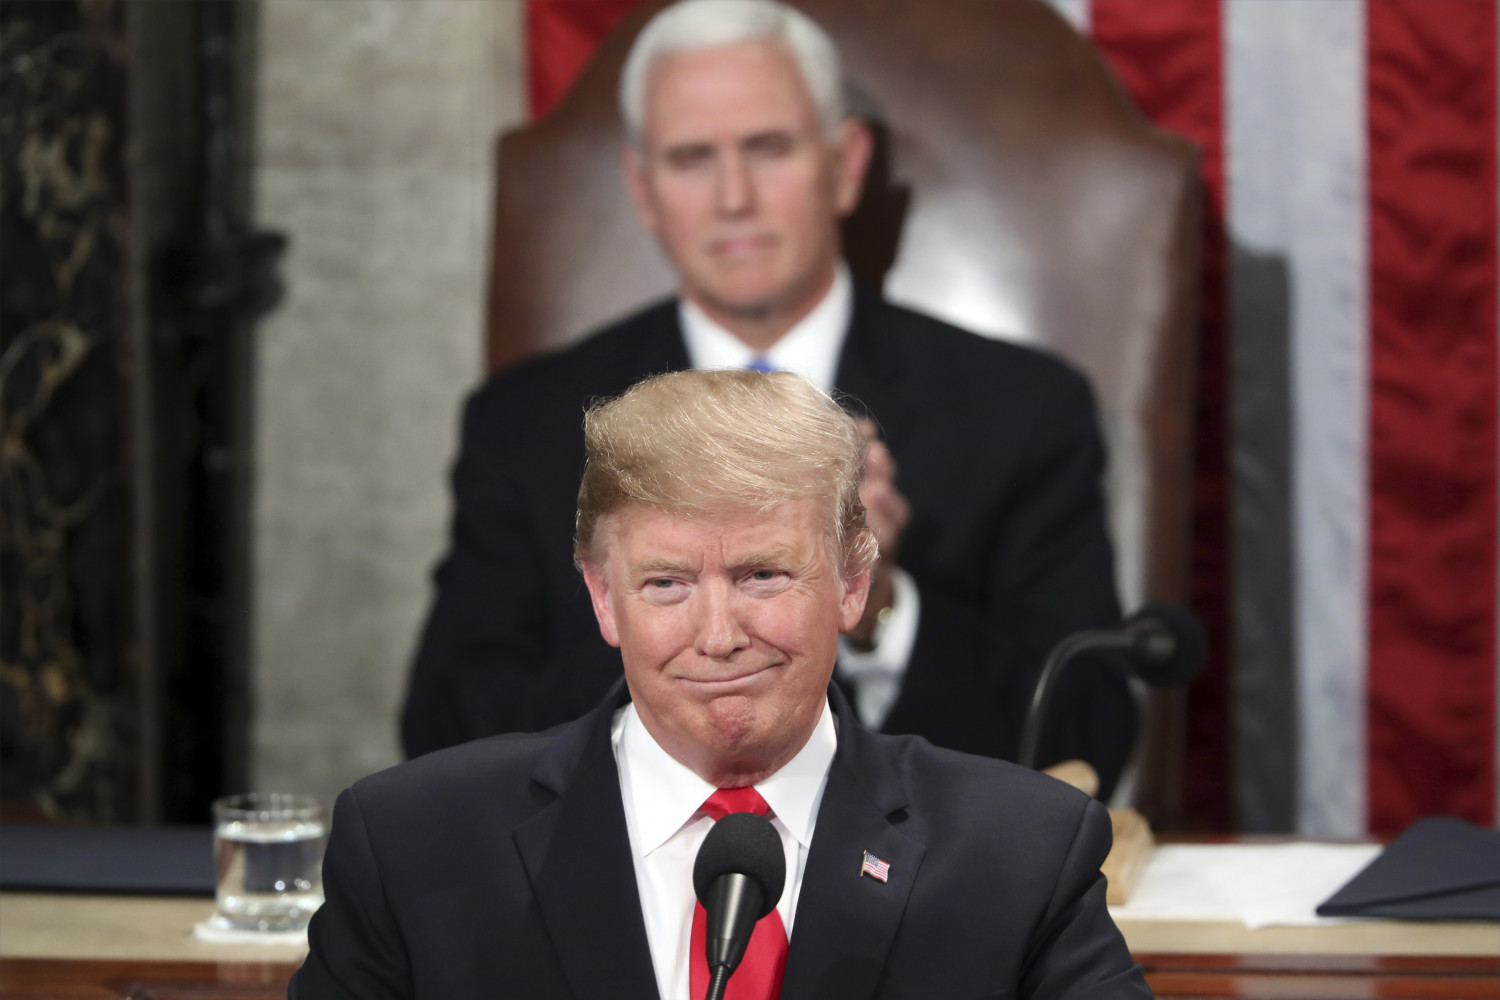 Polls: Most Viewers Approved of Trump’s State of the Union Speech